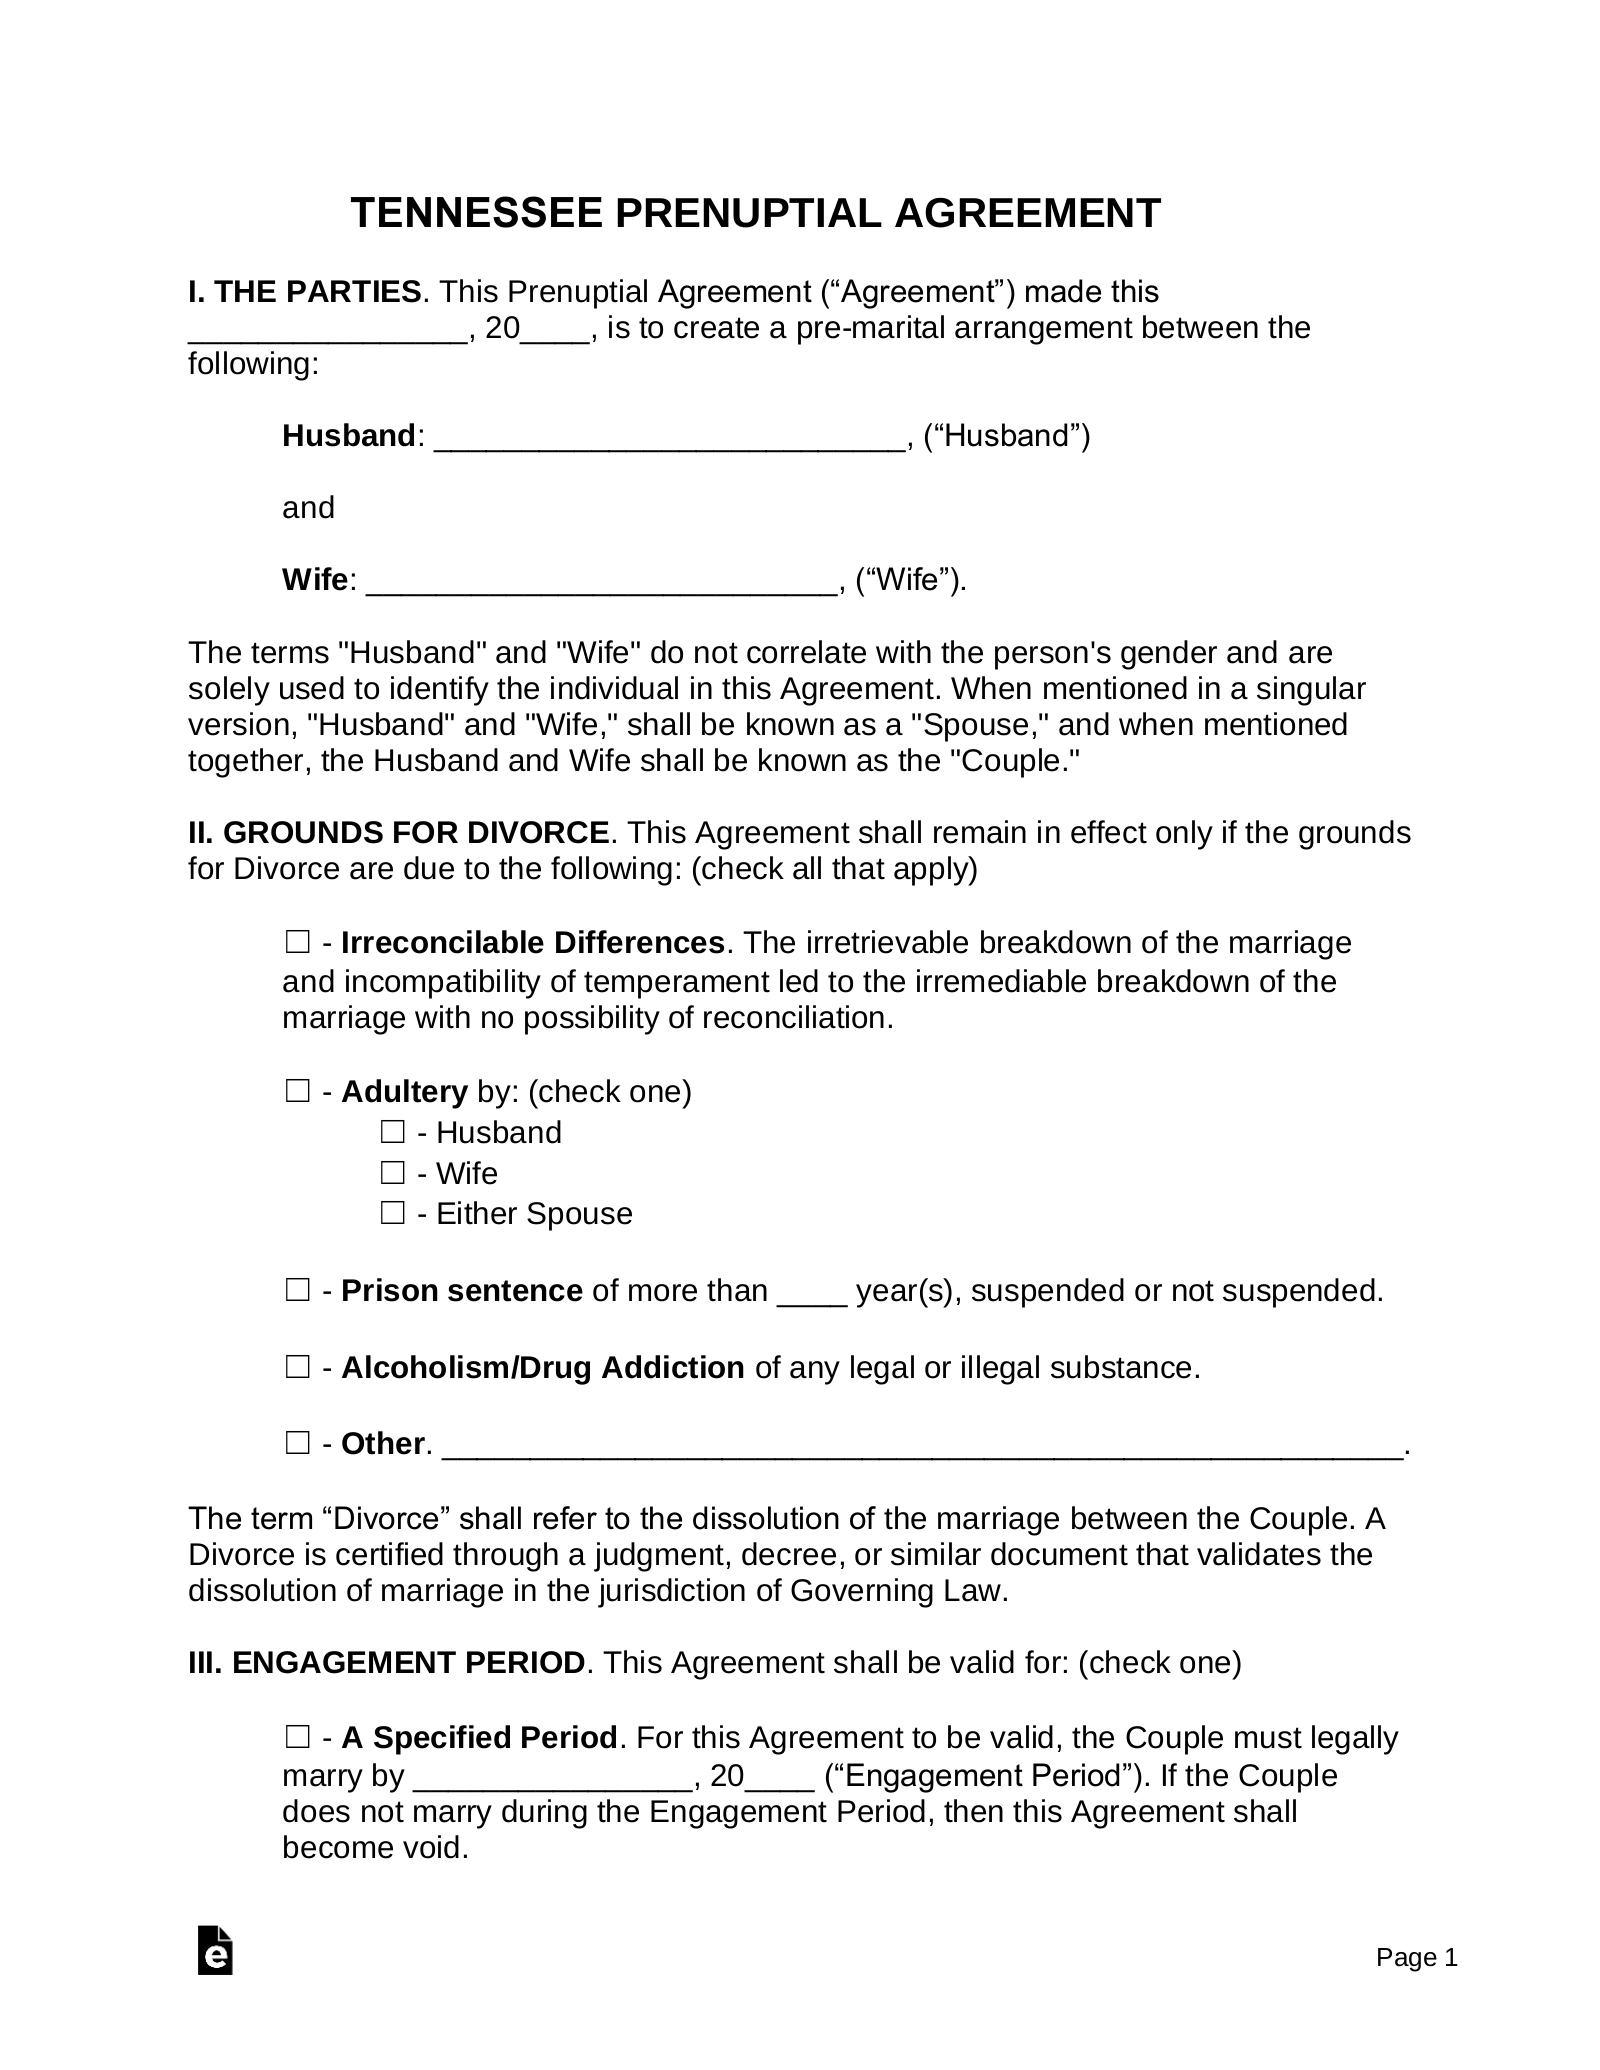 Tennessee Prenuptial Agreement Template